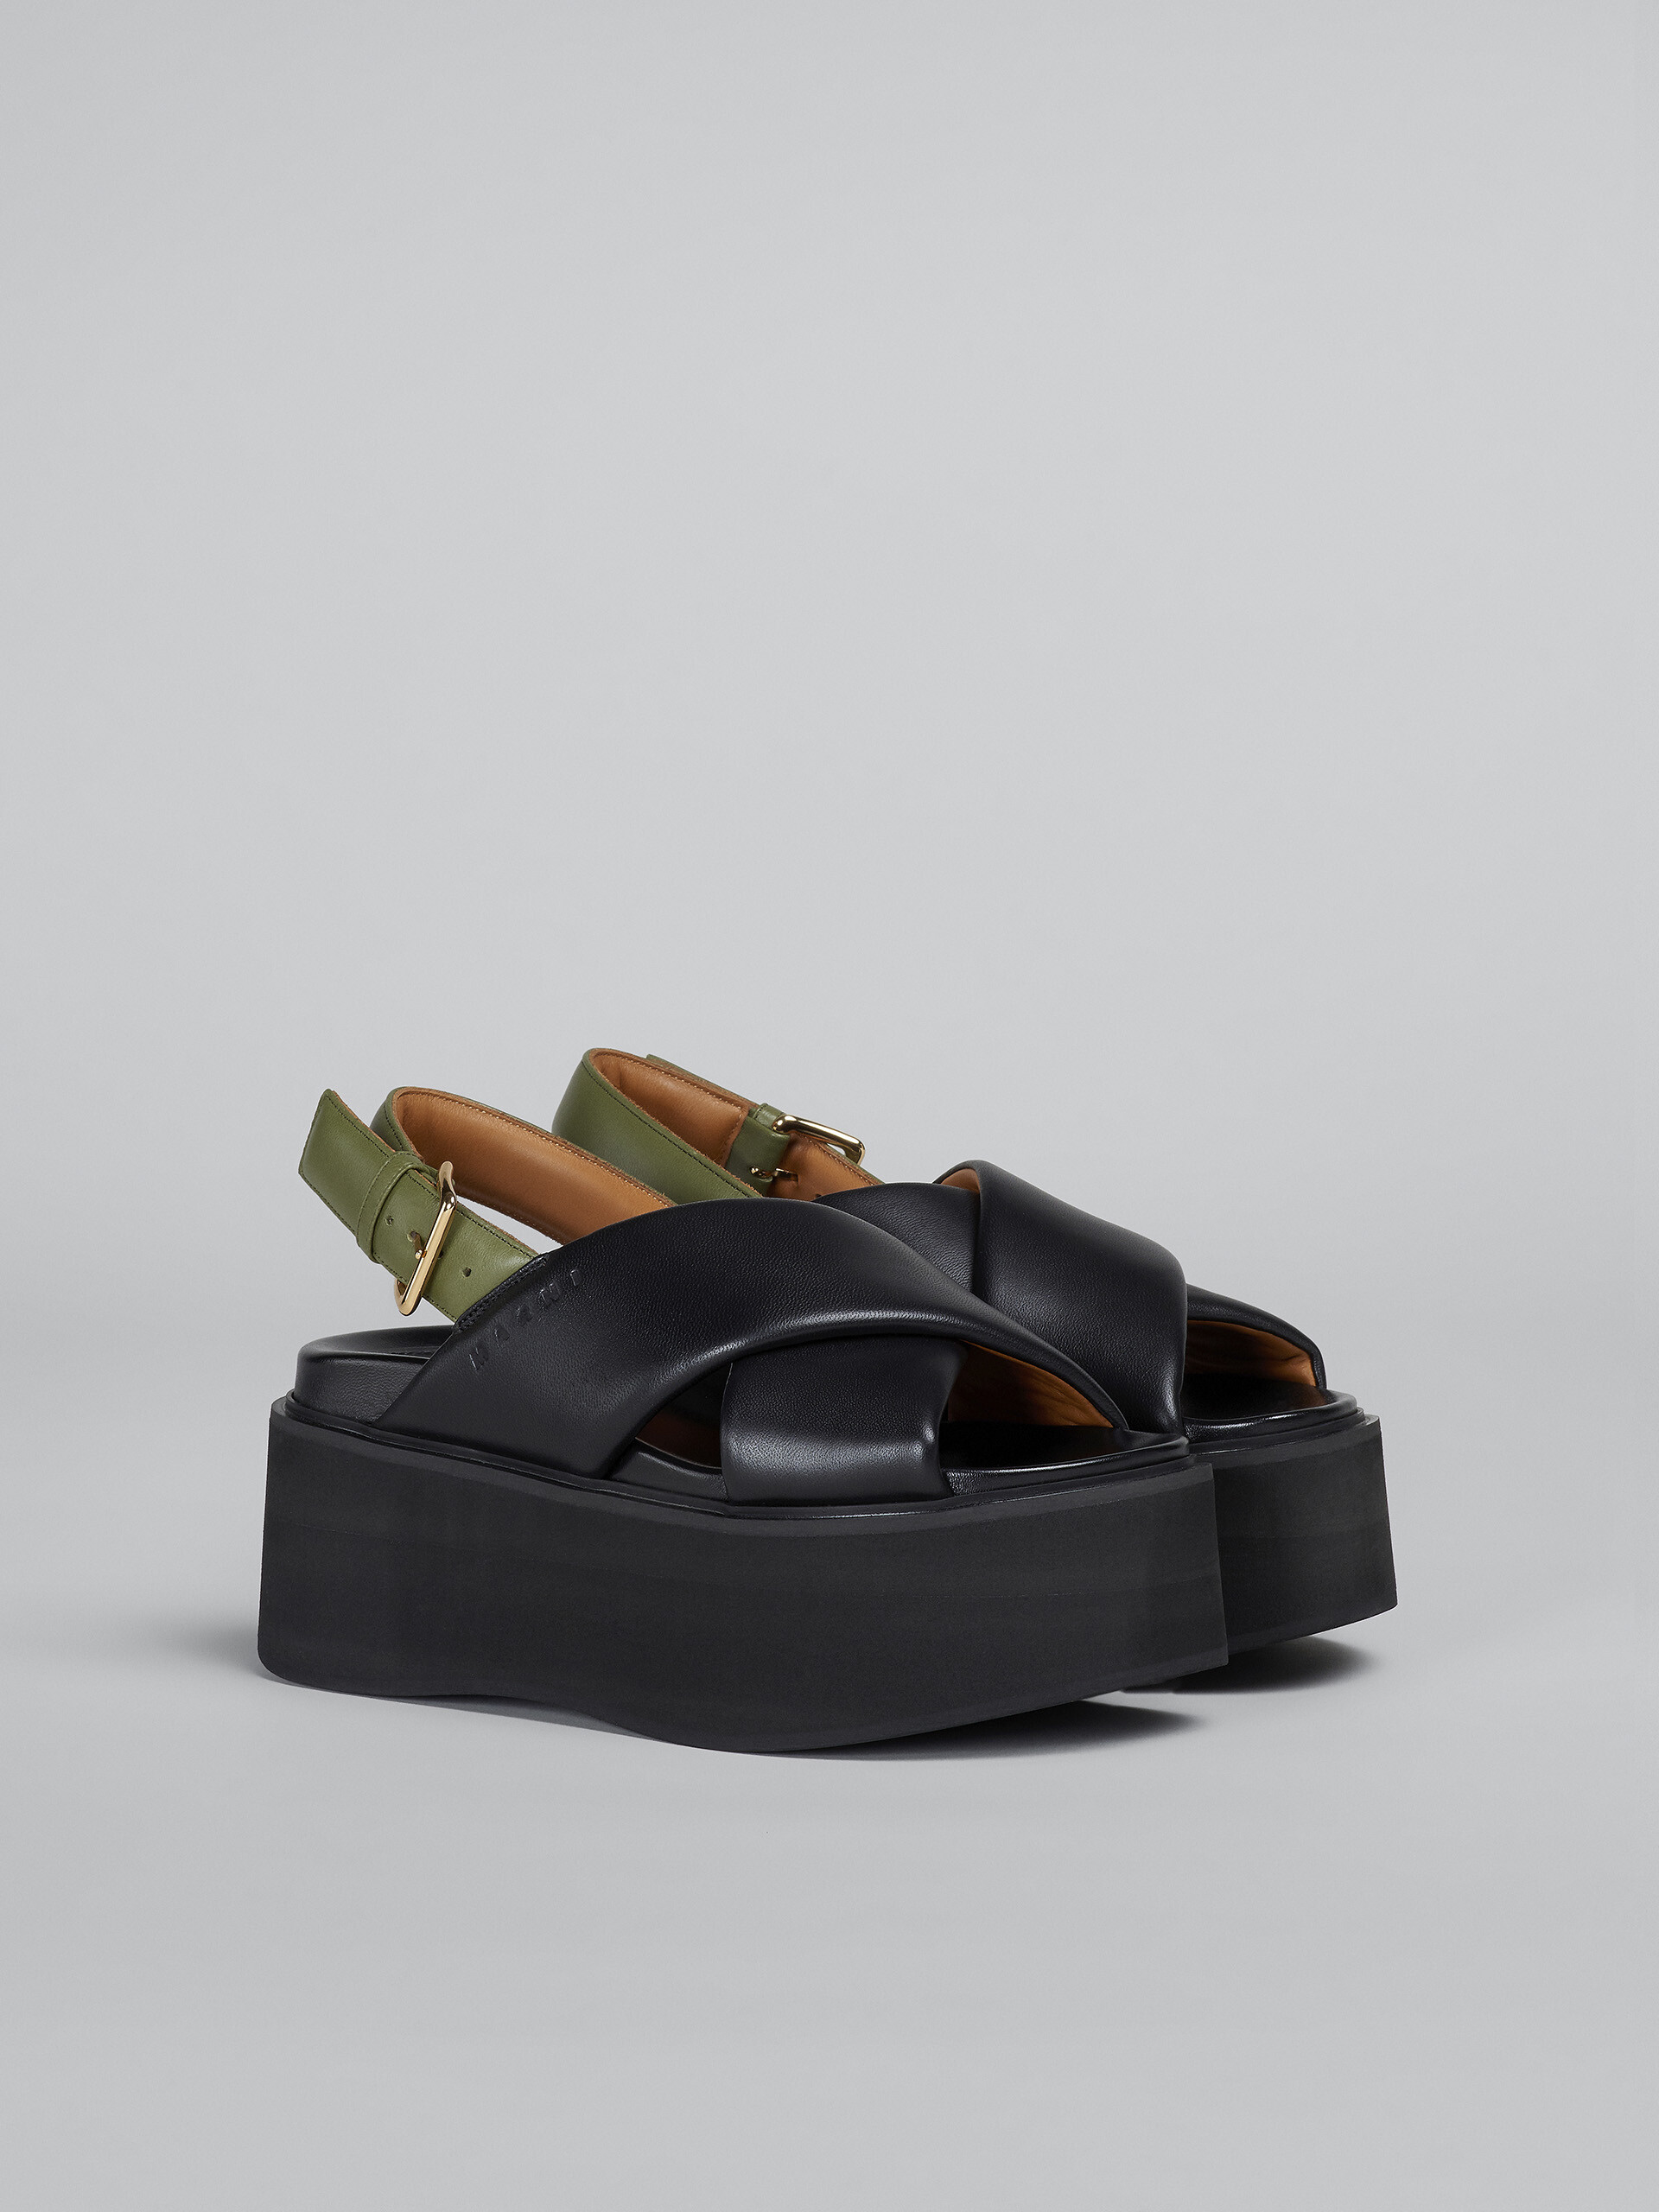 Black and green leather wedge - Sandals - Image 2